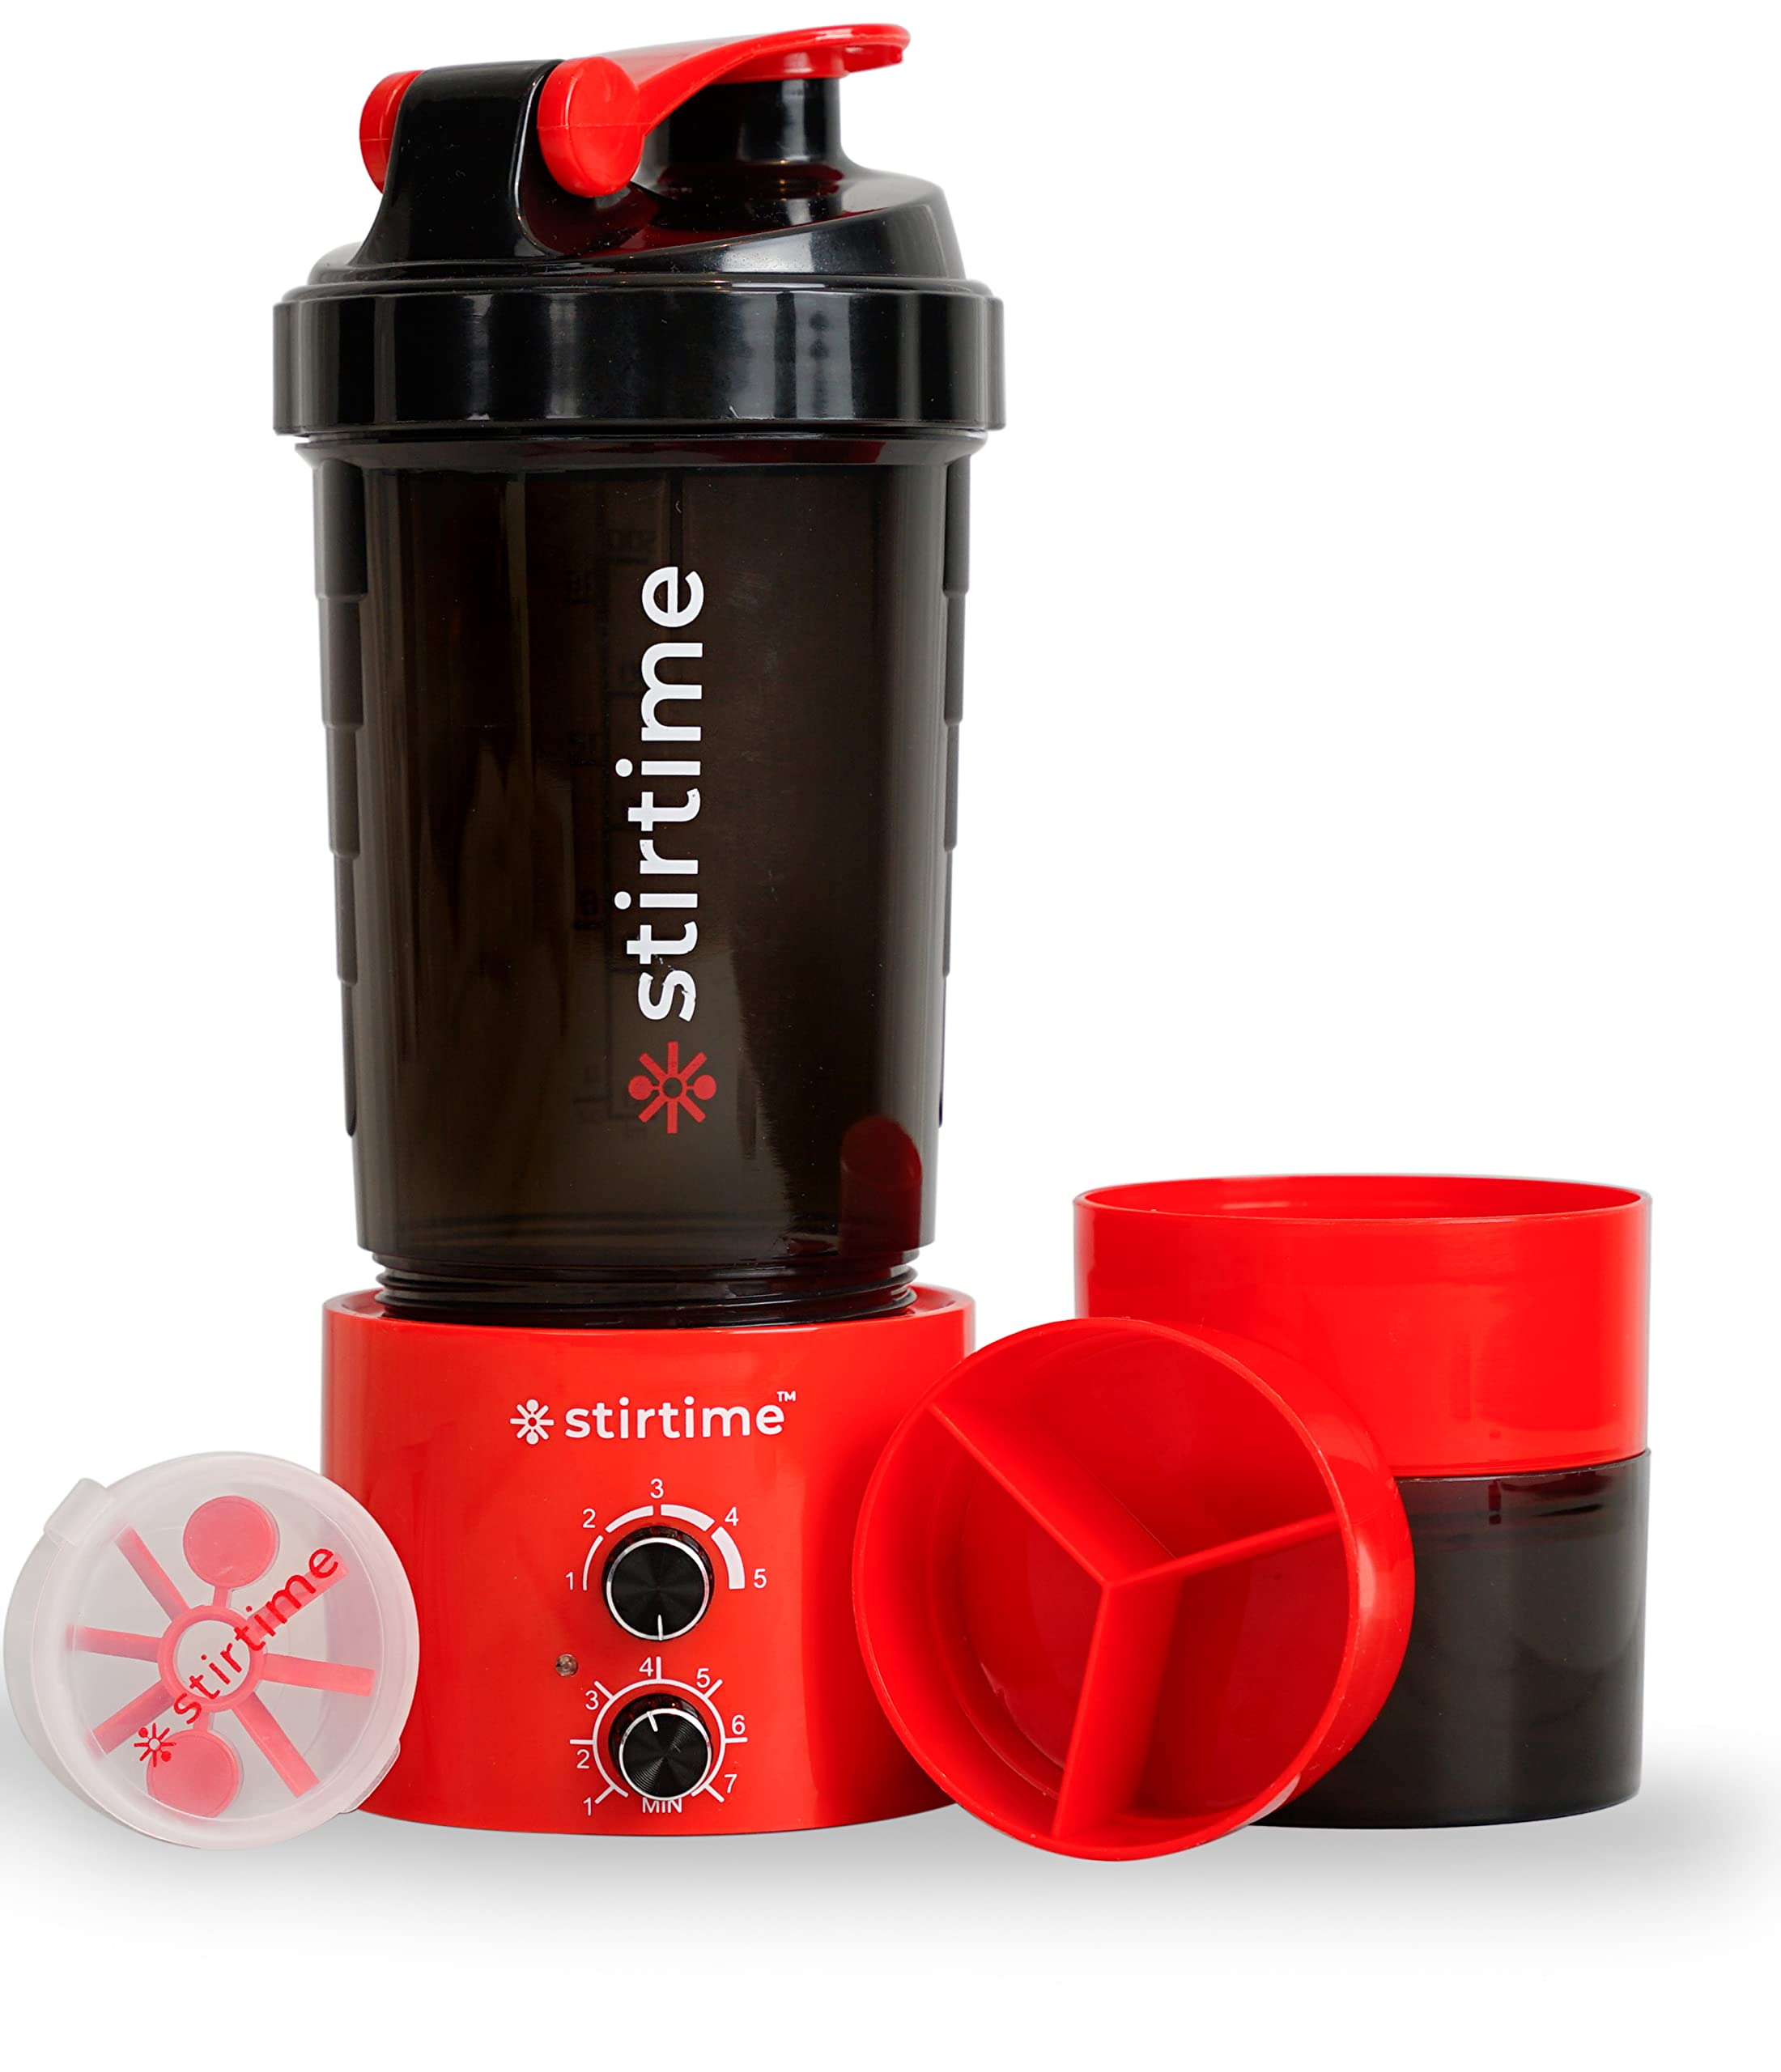 Stirtime Magnetic Protein Powder Mixer Dissolves Unmixed Clumps in